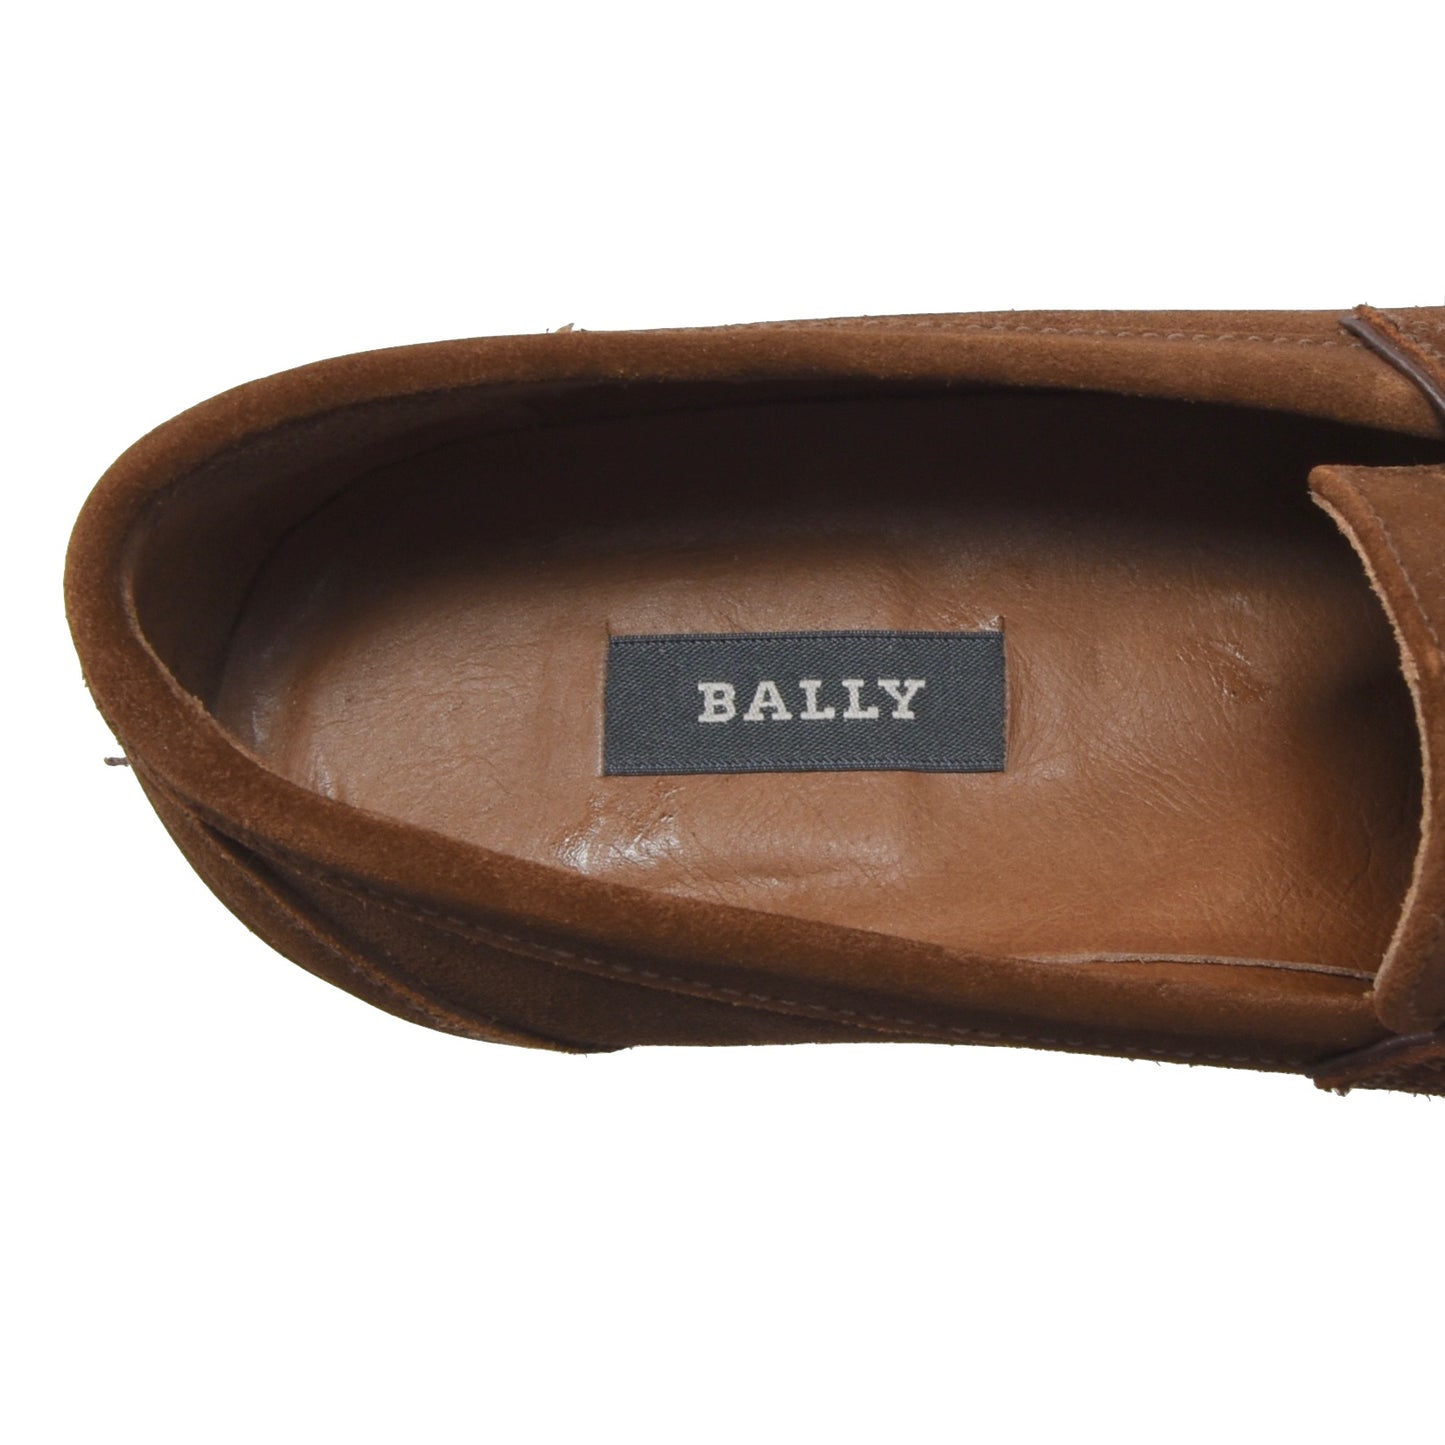 NOS Bally Suede Loafers Size 43.5 - Brown